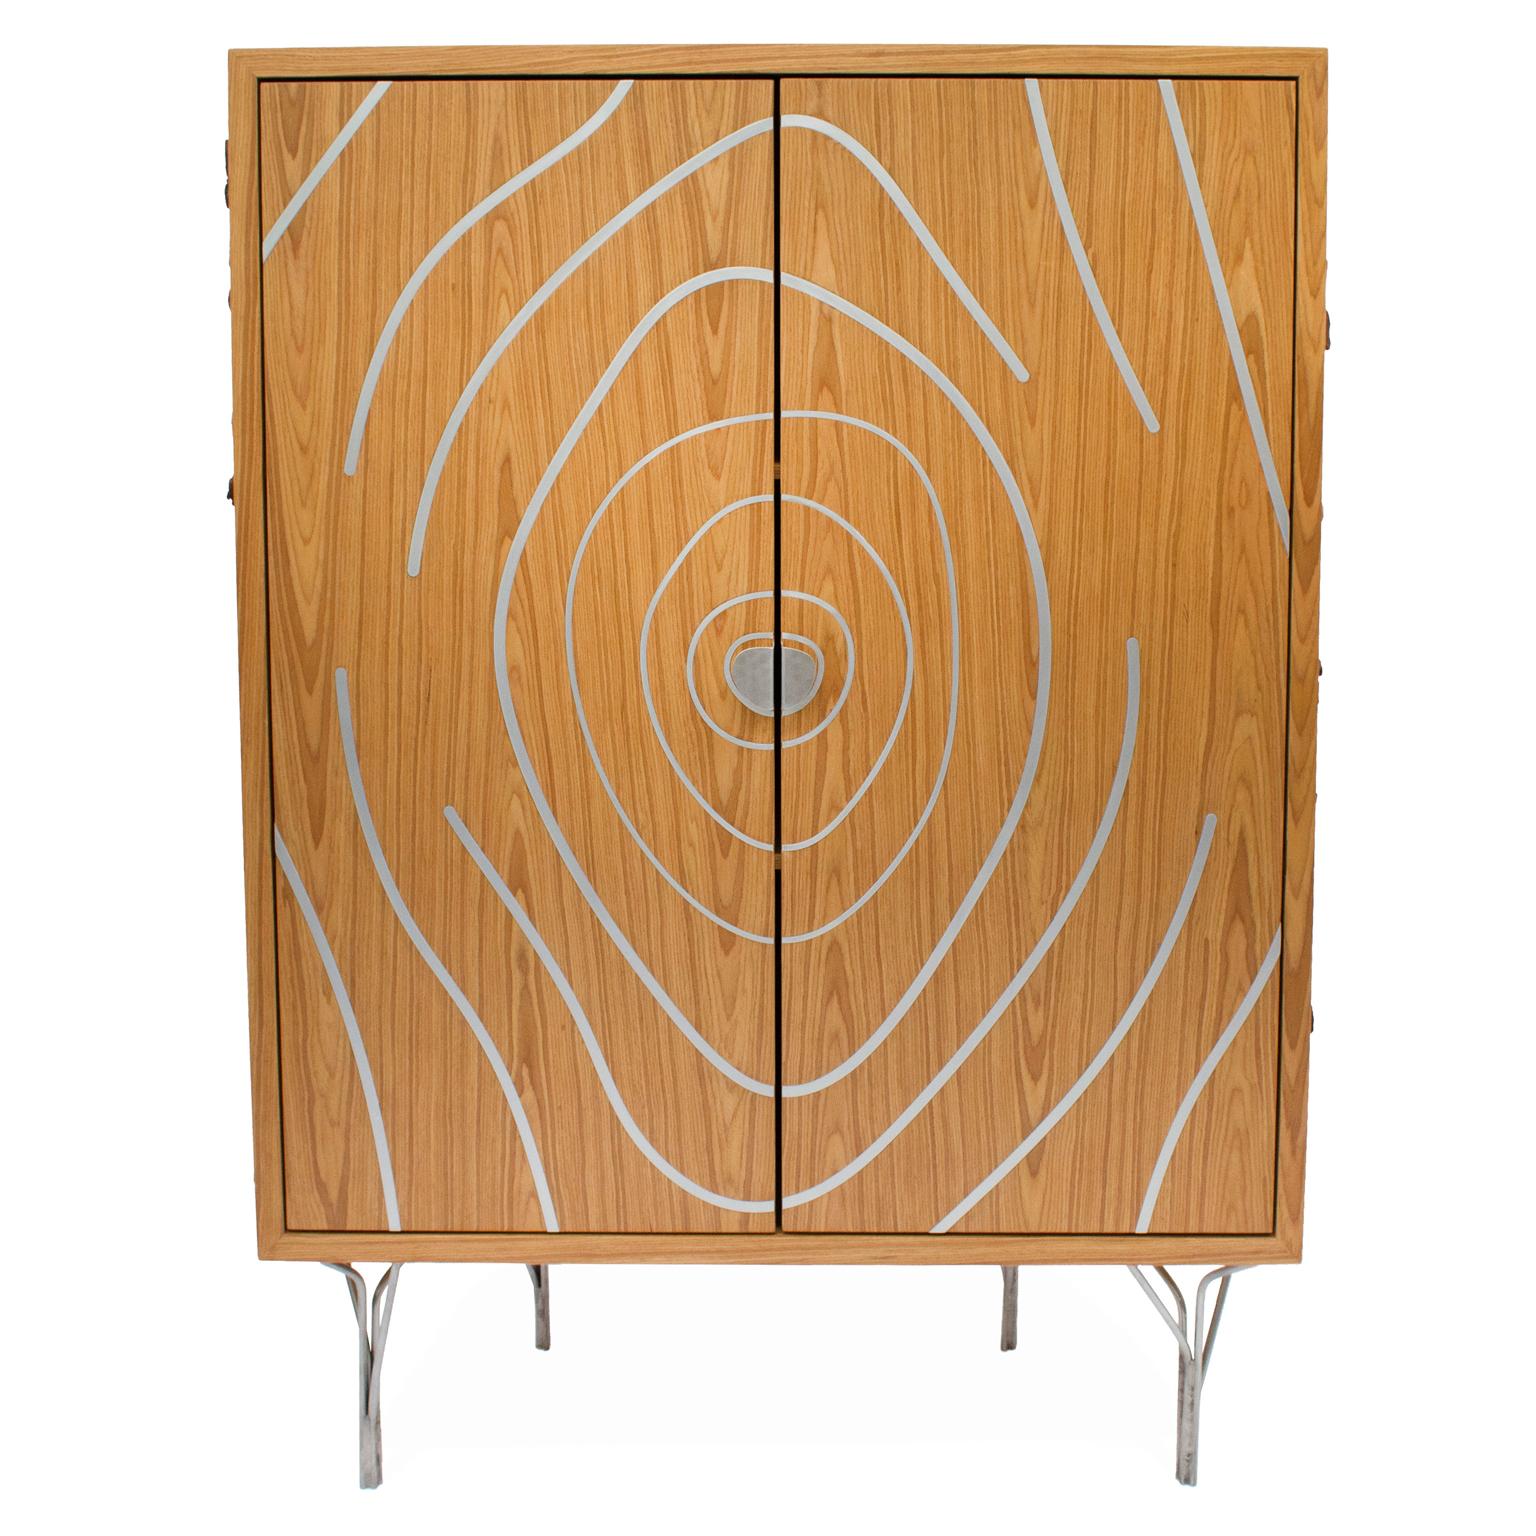 This contemporary style cabinet is part of the Tronco collection, for the purpose of representing the shape of a sliced tree, referring to the trunk. All their search for formats depart from nature, from the represented veins to the branches made of